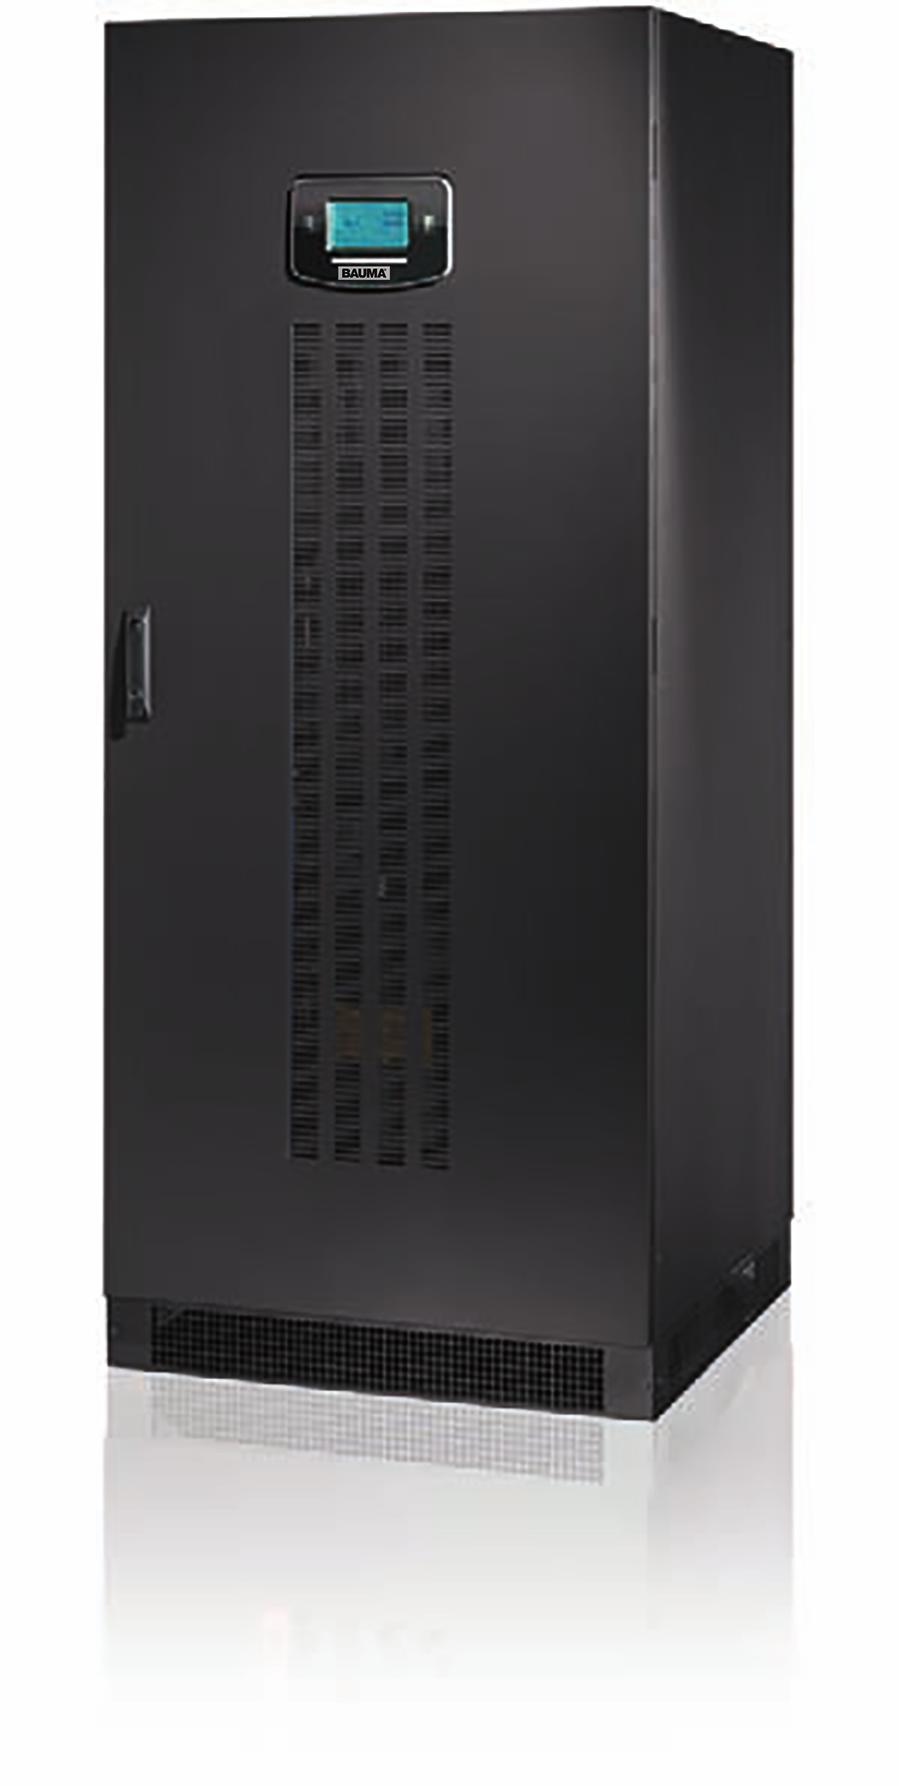 configurations Extensive par configurations Total protection BMPM/BMPT series UPS provide maximum protection and power quality for mission critical loads, including data centres, industrial